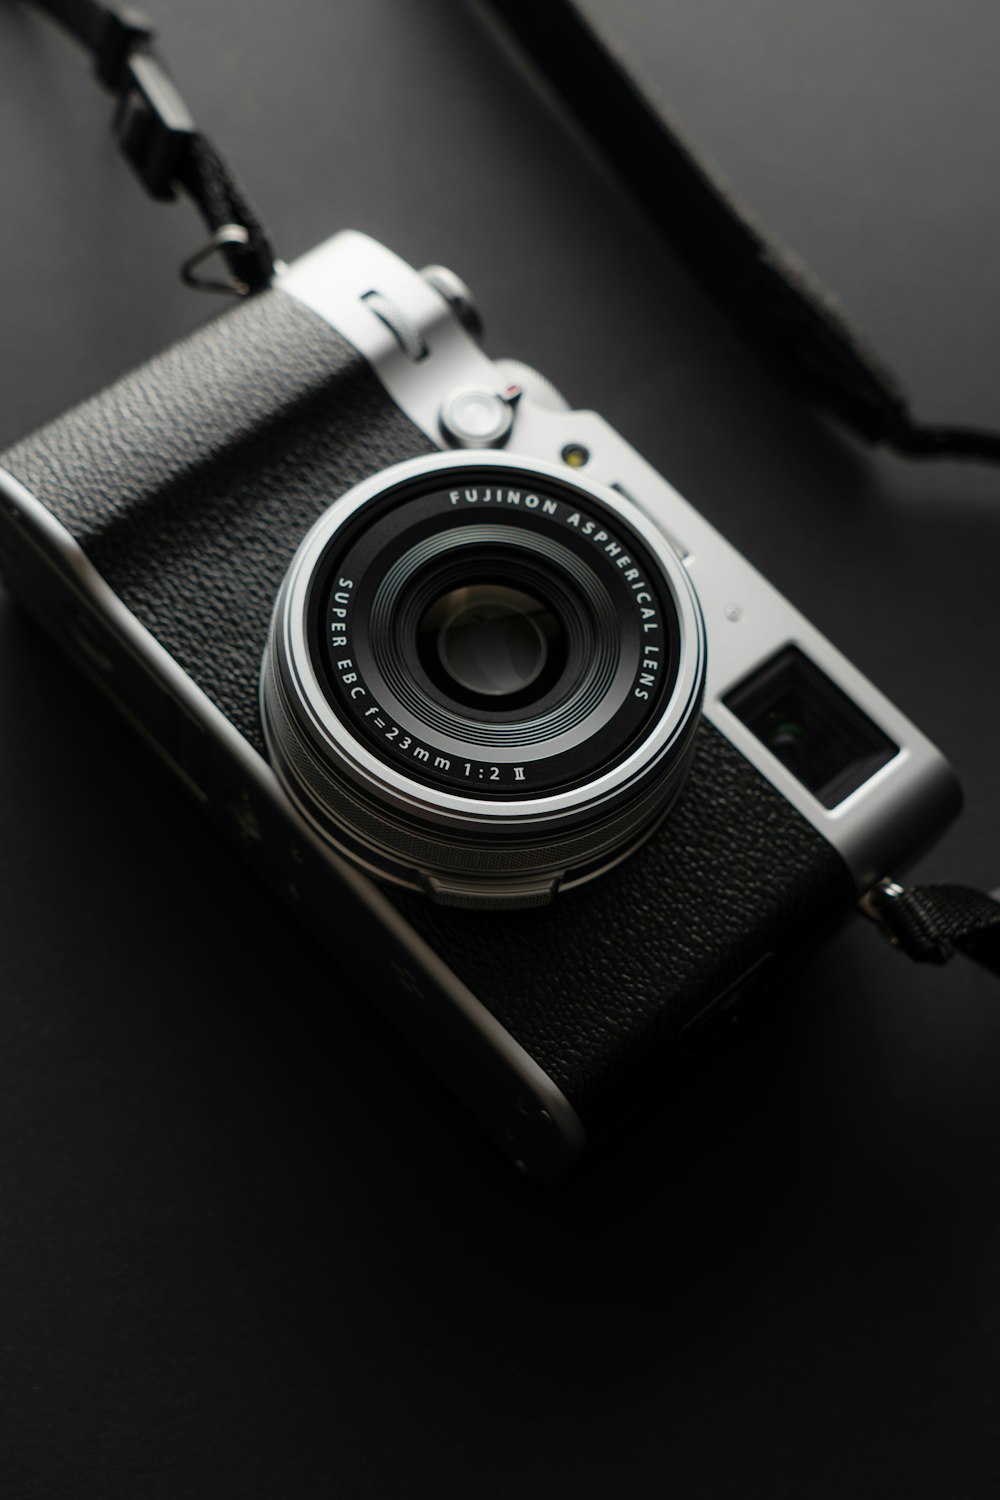 a black and white photo of a camera